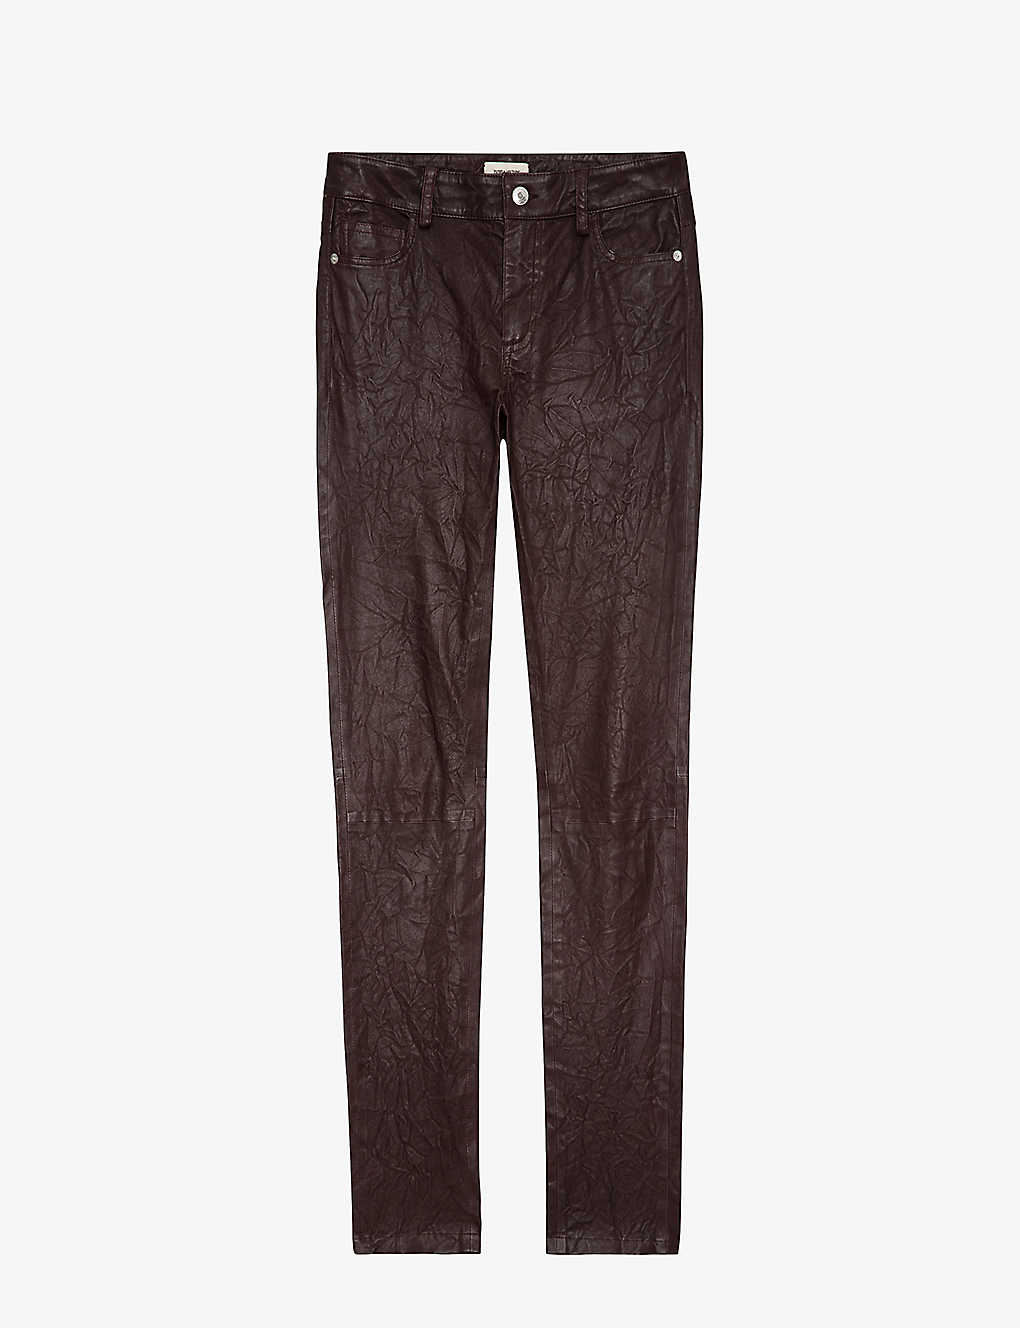 Zadig & Voltaire Phlame Crinkled Leather Trousers In Chocolate